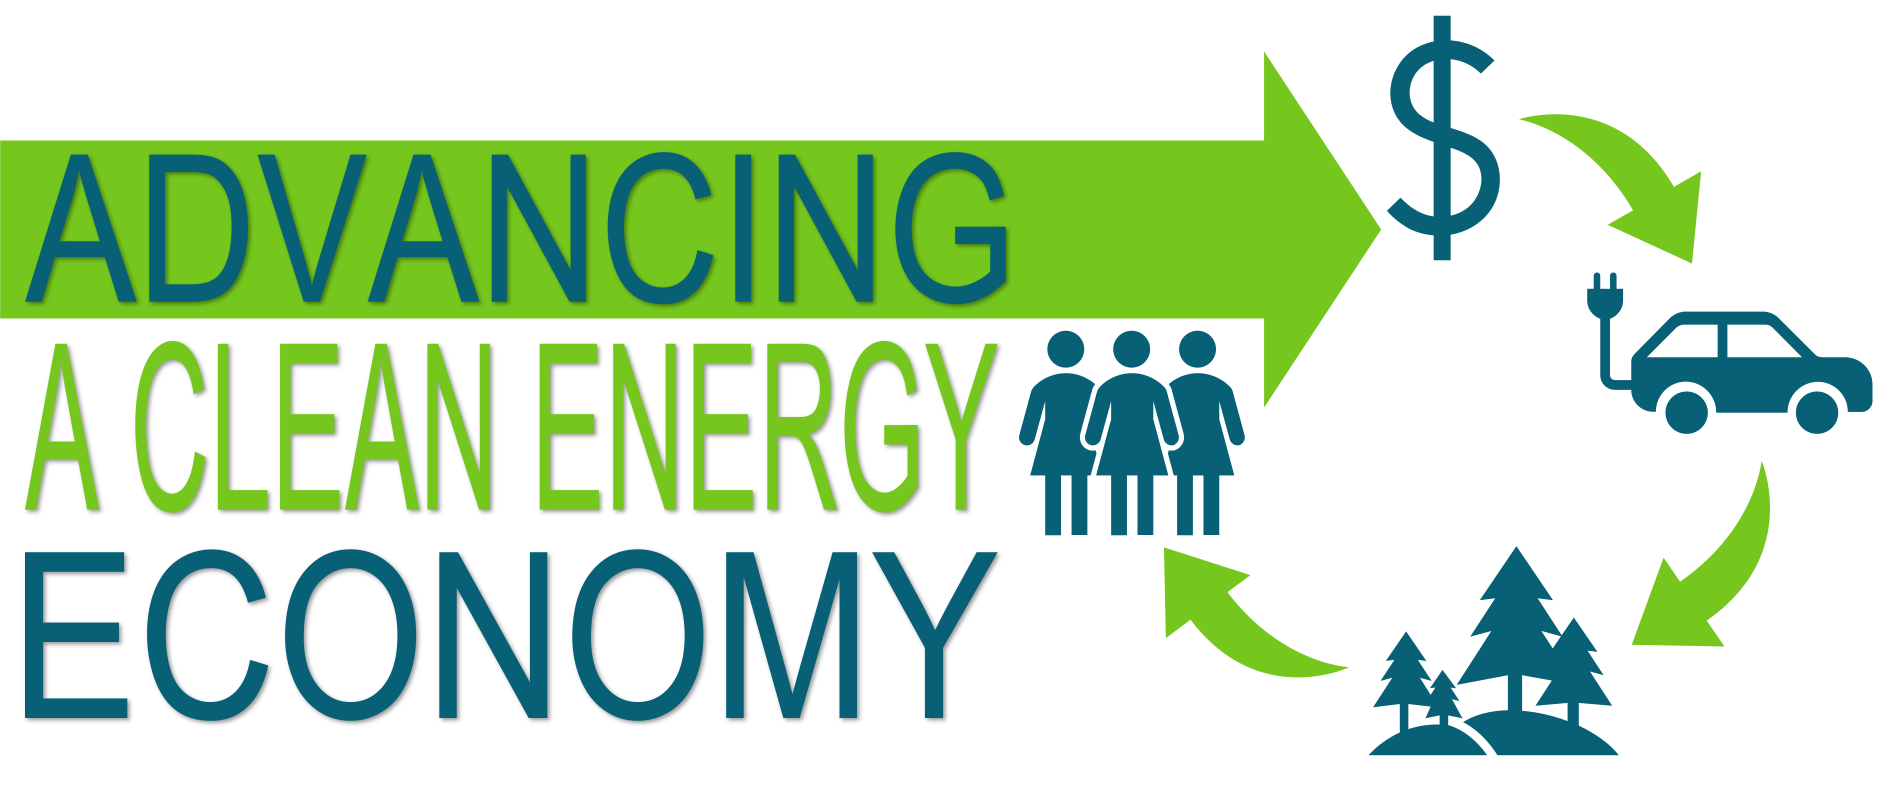 Advancing a Clean Energy Economy: A Conversation with Phil Huffman and Christine Donovan